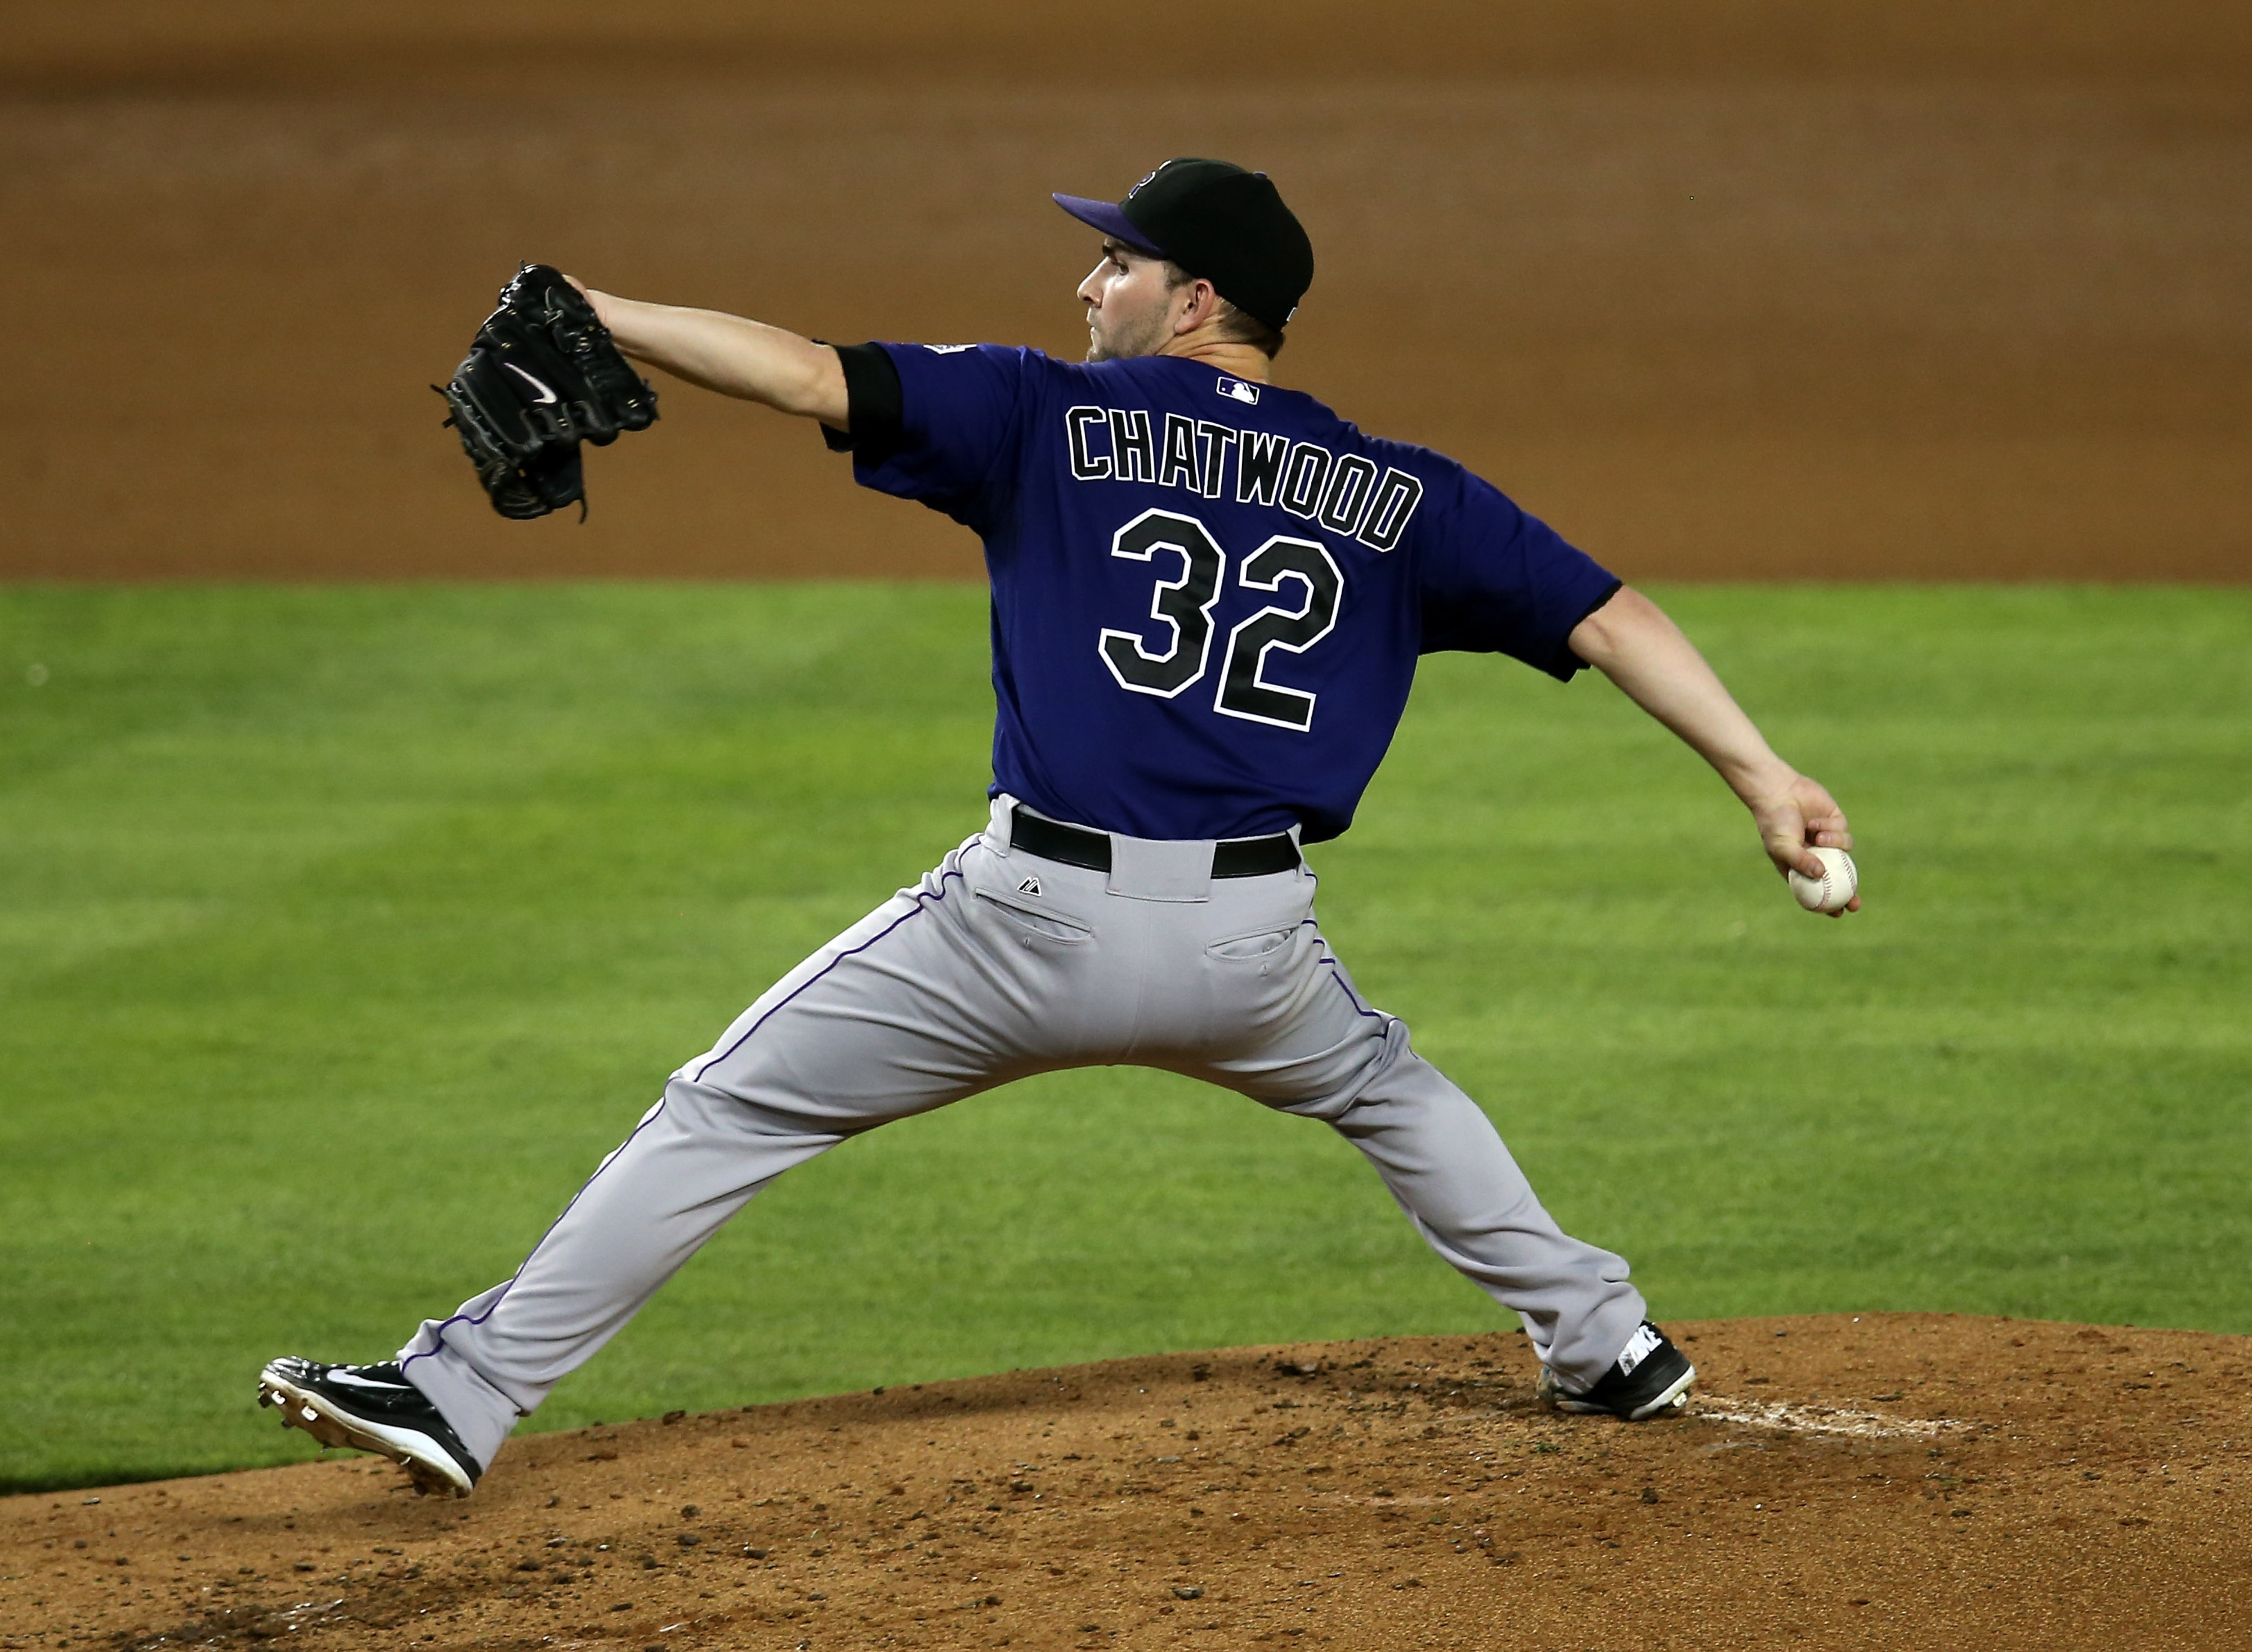 Wiley will be responsible for overseeing development of Rockies pitchers like Tyler Chatwood.